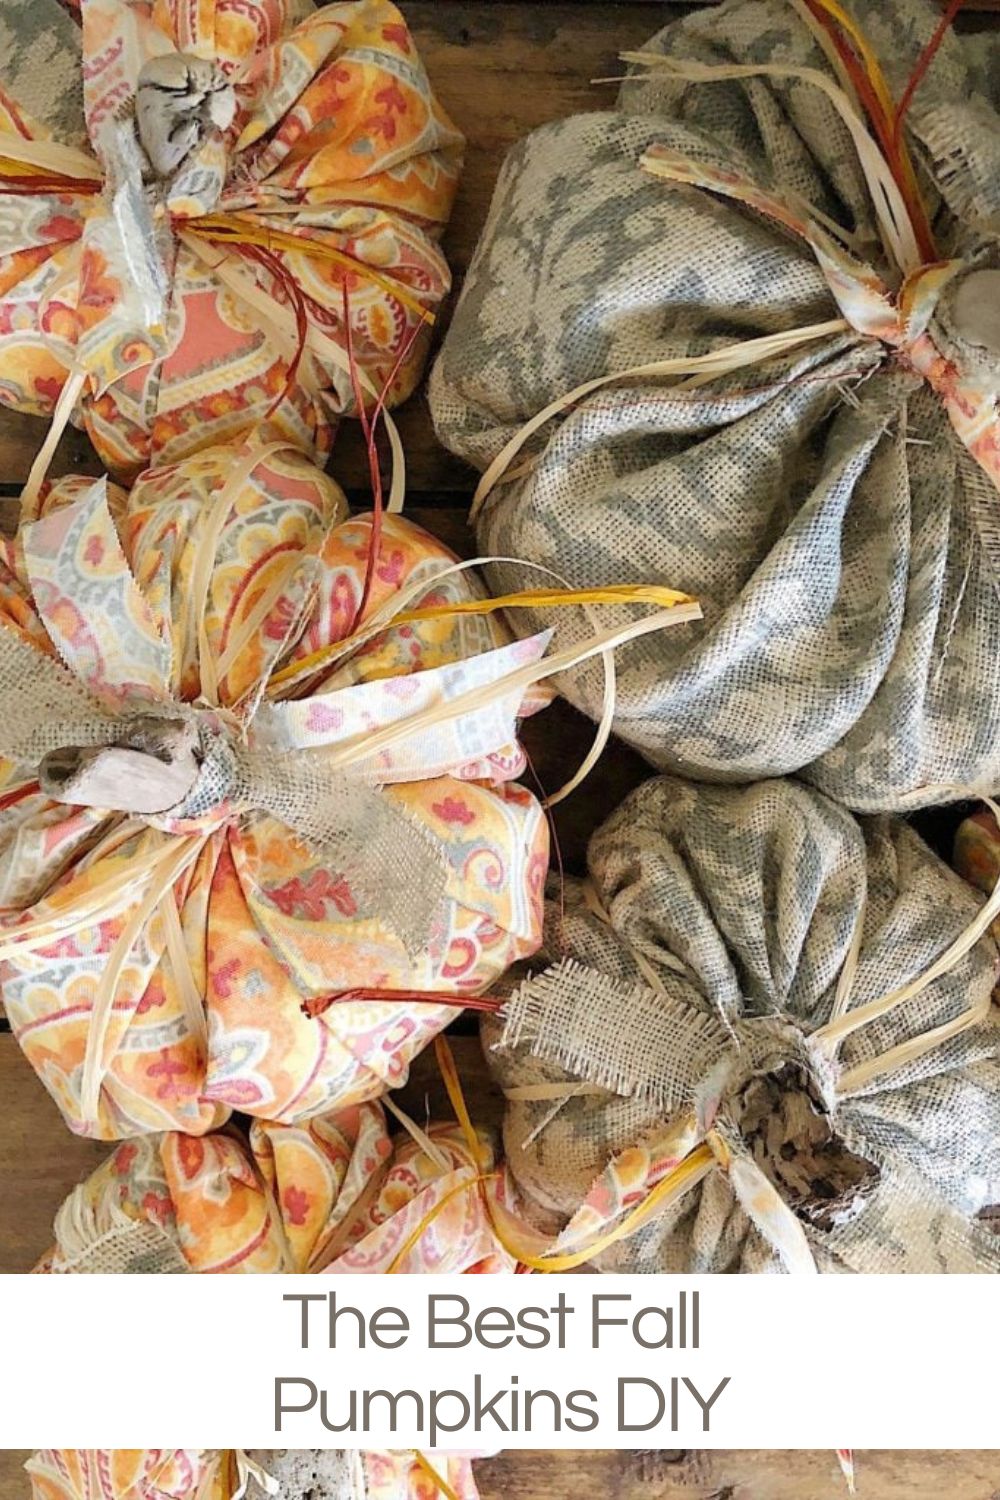 Back to school means that fall is here so I am sharing a favorite Fall Pumpkins DIY. These pumpkins are made with fall fabric and driftwood!